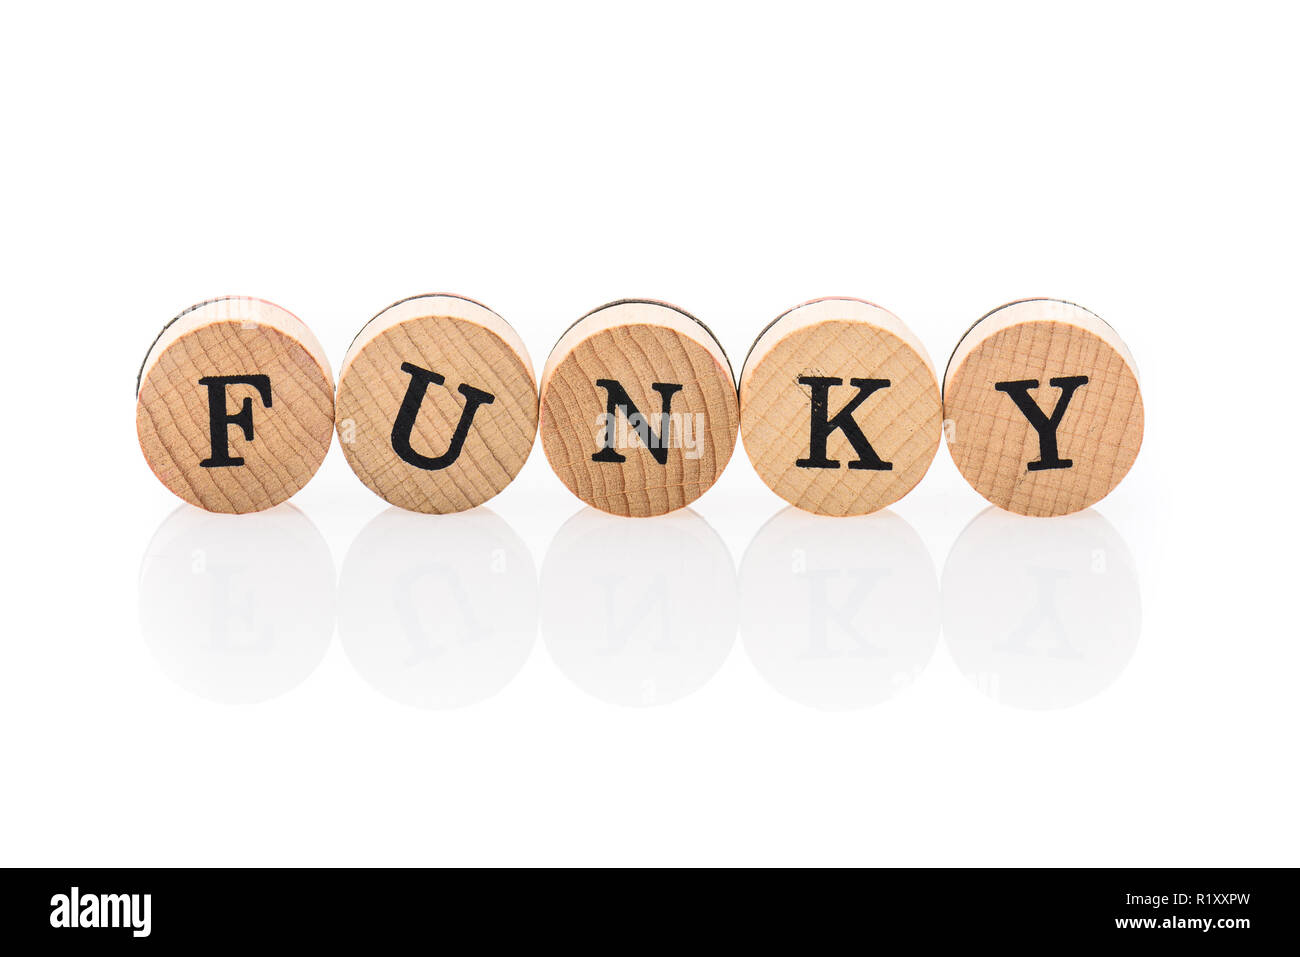 Word Funky from circular wooden tiles with letters children toy. Concept of playfulness spelled in children toy letters. Stock Photo